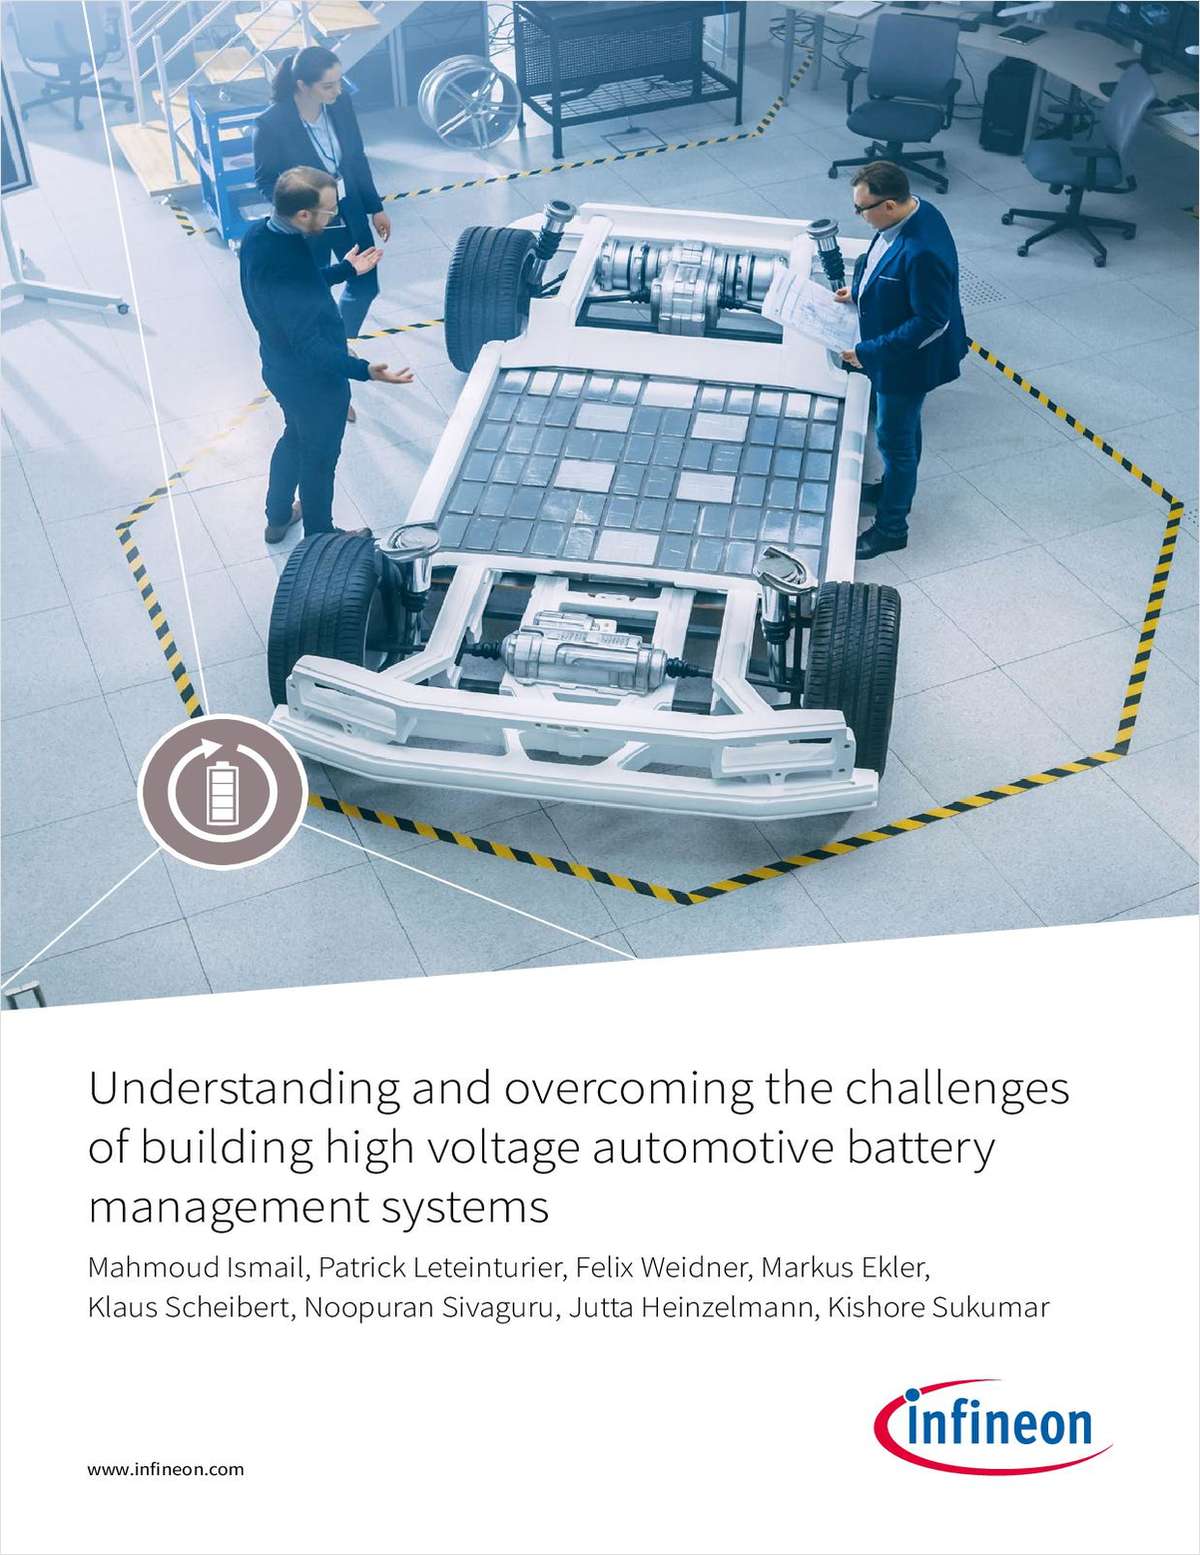 Understanding and Overcoming the Challenges of Building High Voltage Automotive Battery Management Systems